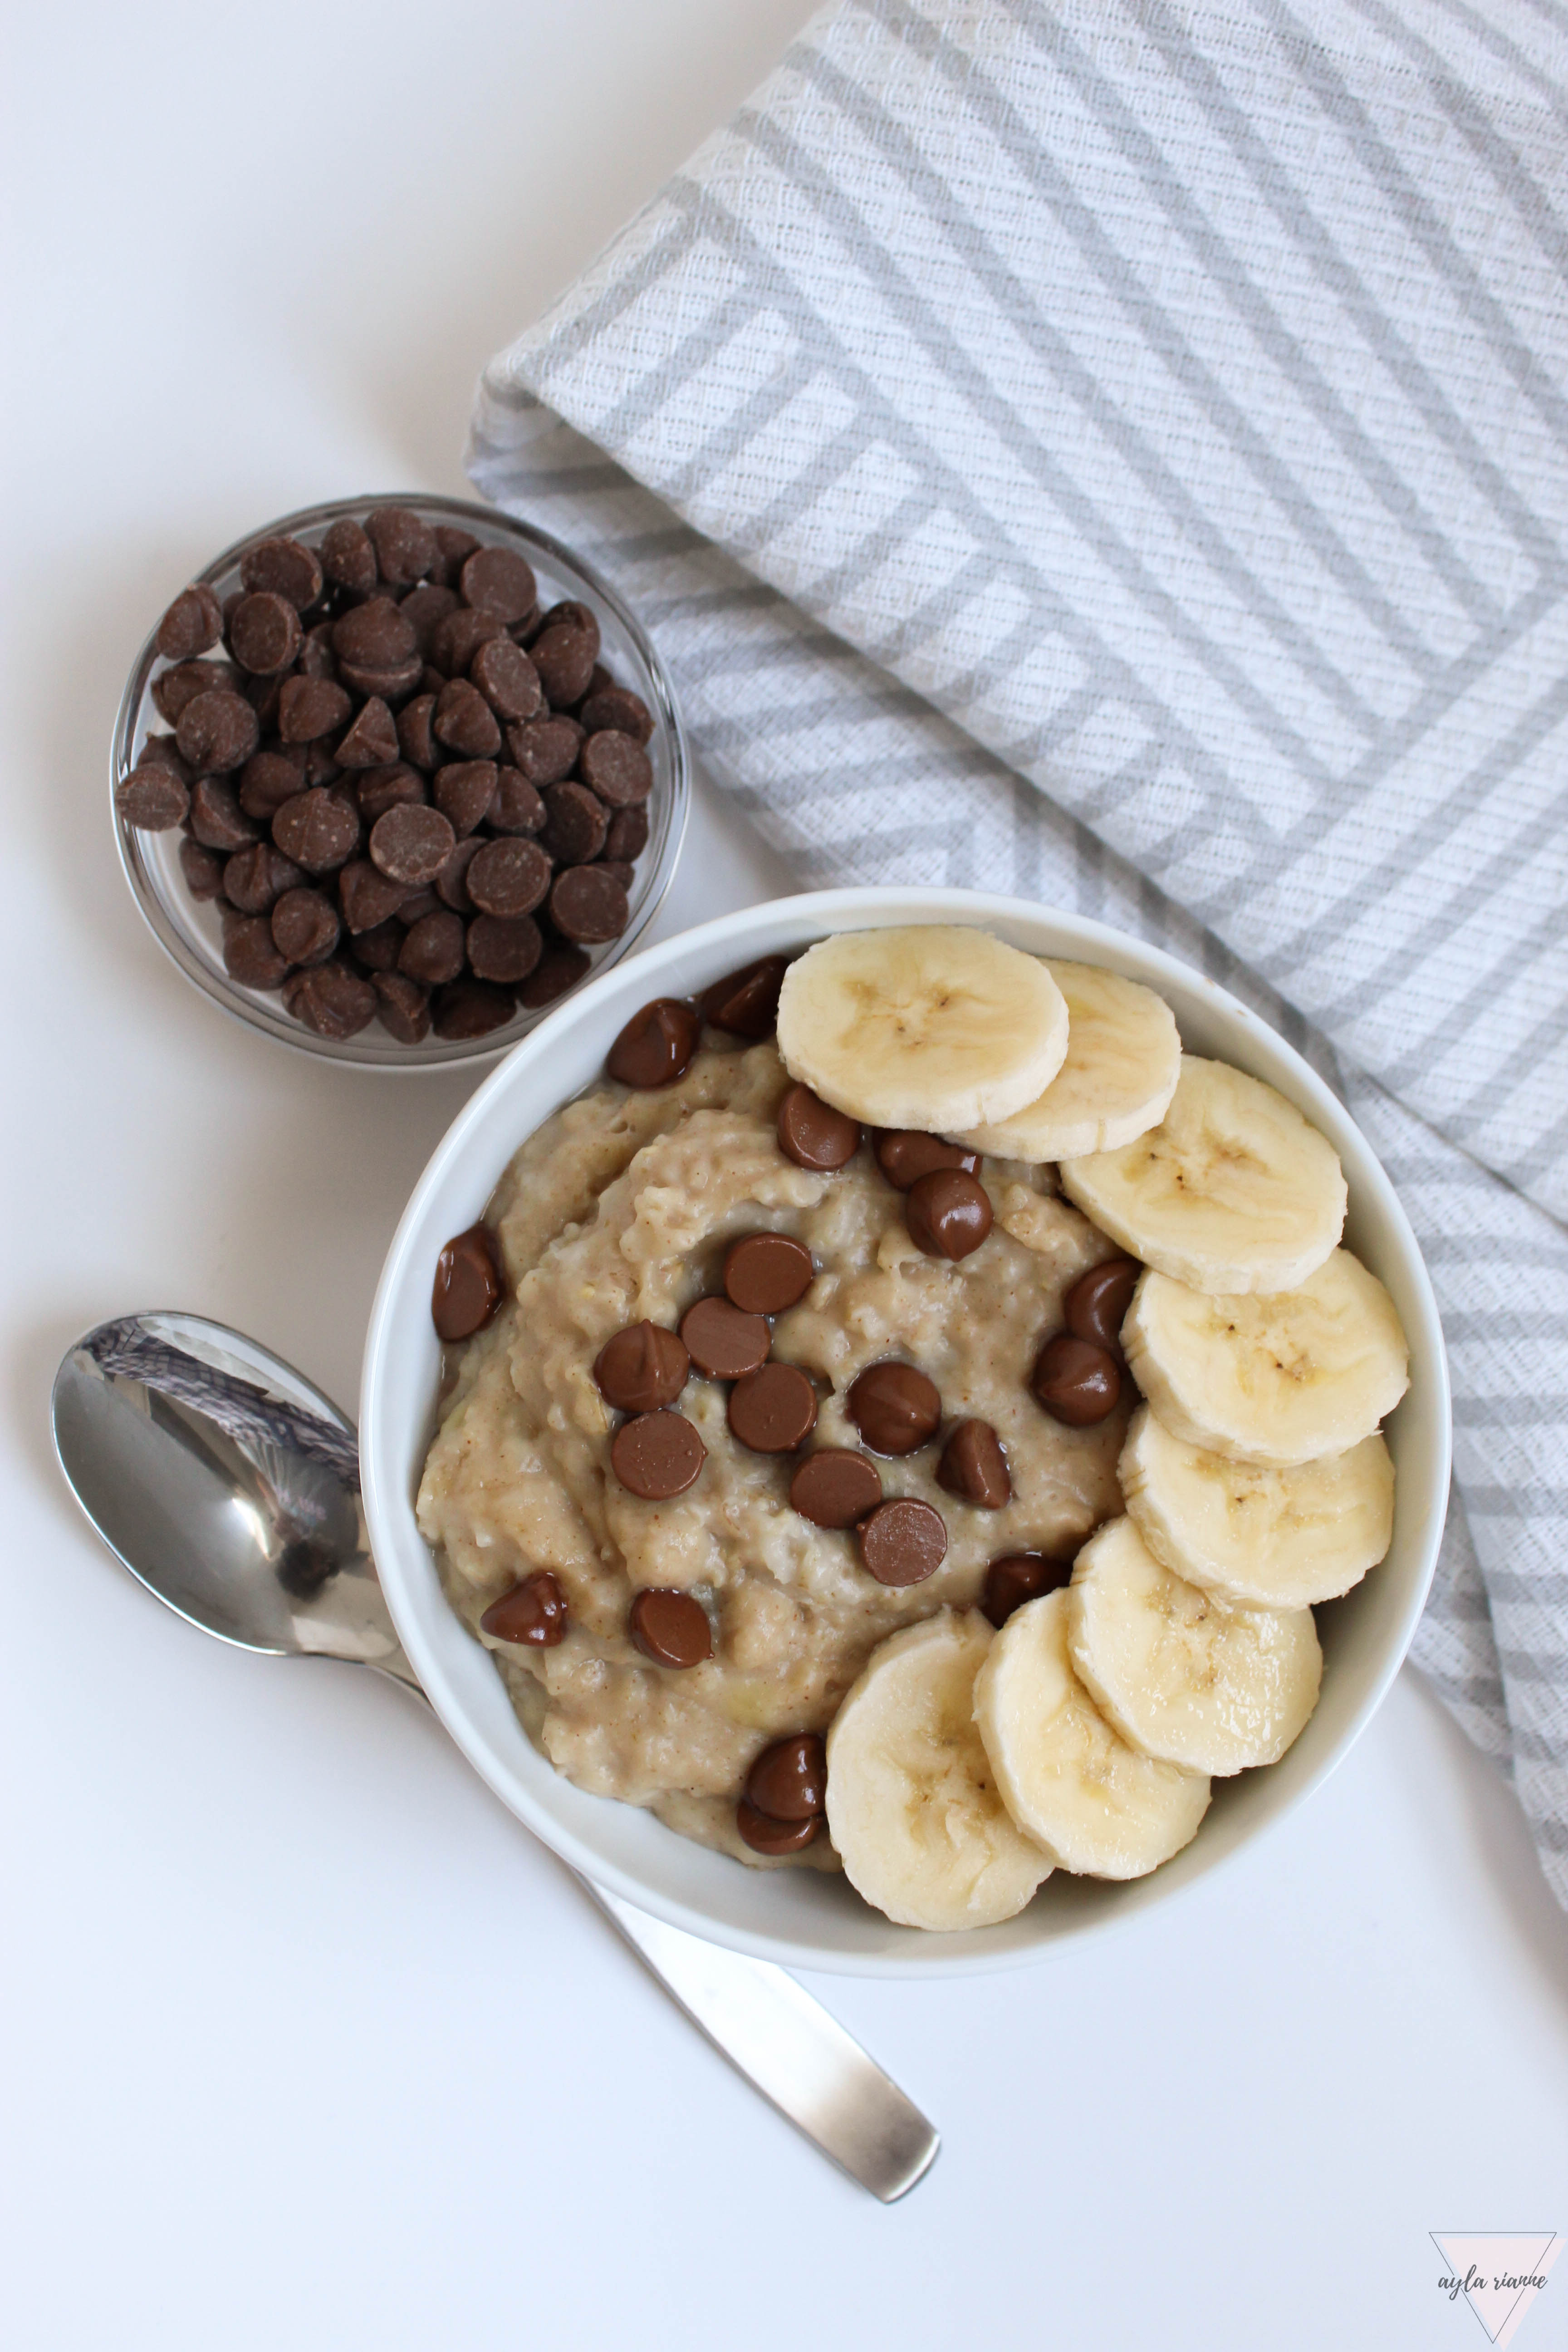 Oatmeal with bananas, peanut butter, and chocolate chips.